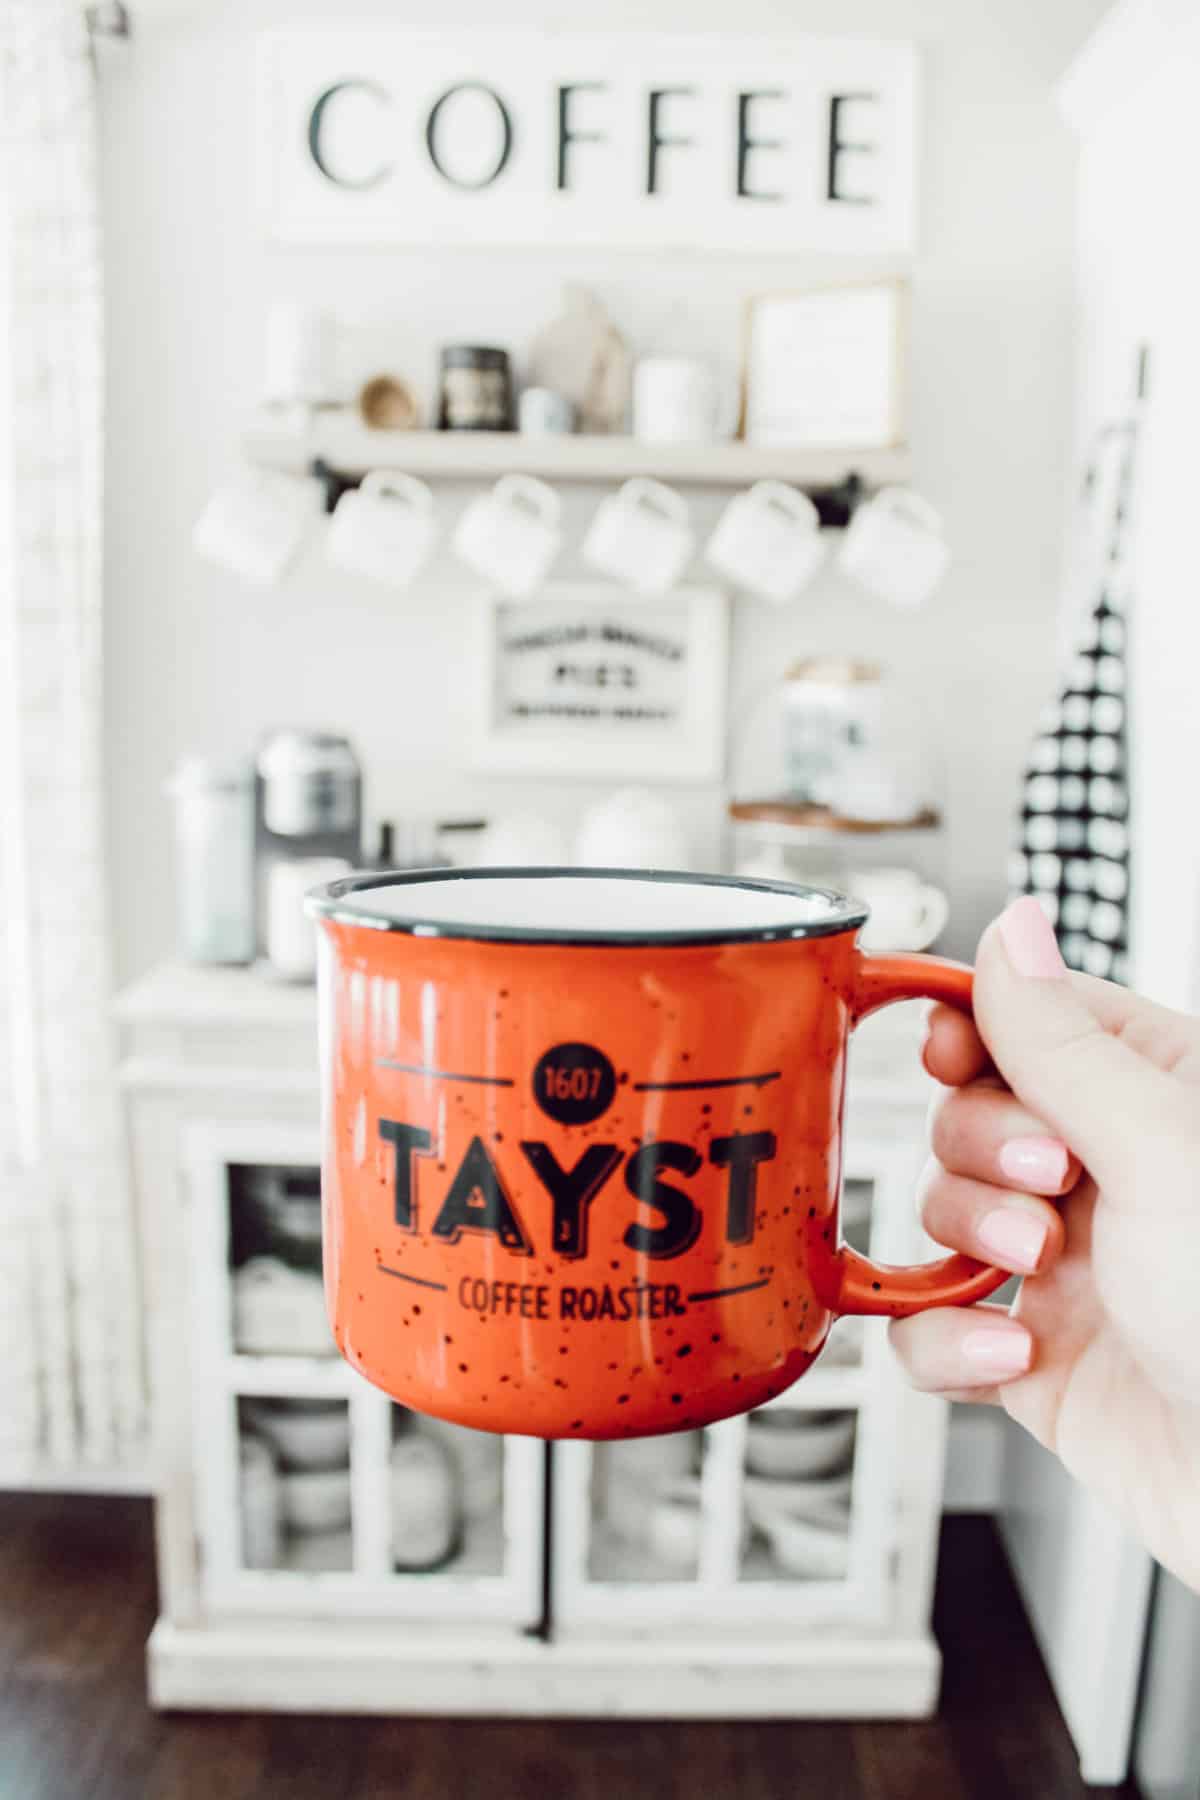 My Honest Review of Tayst Coffee